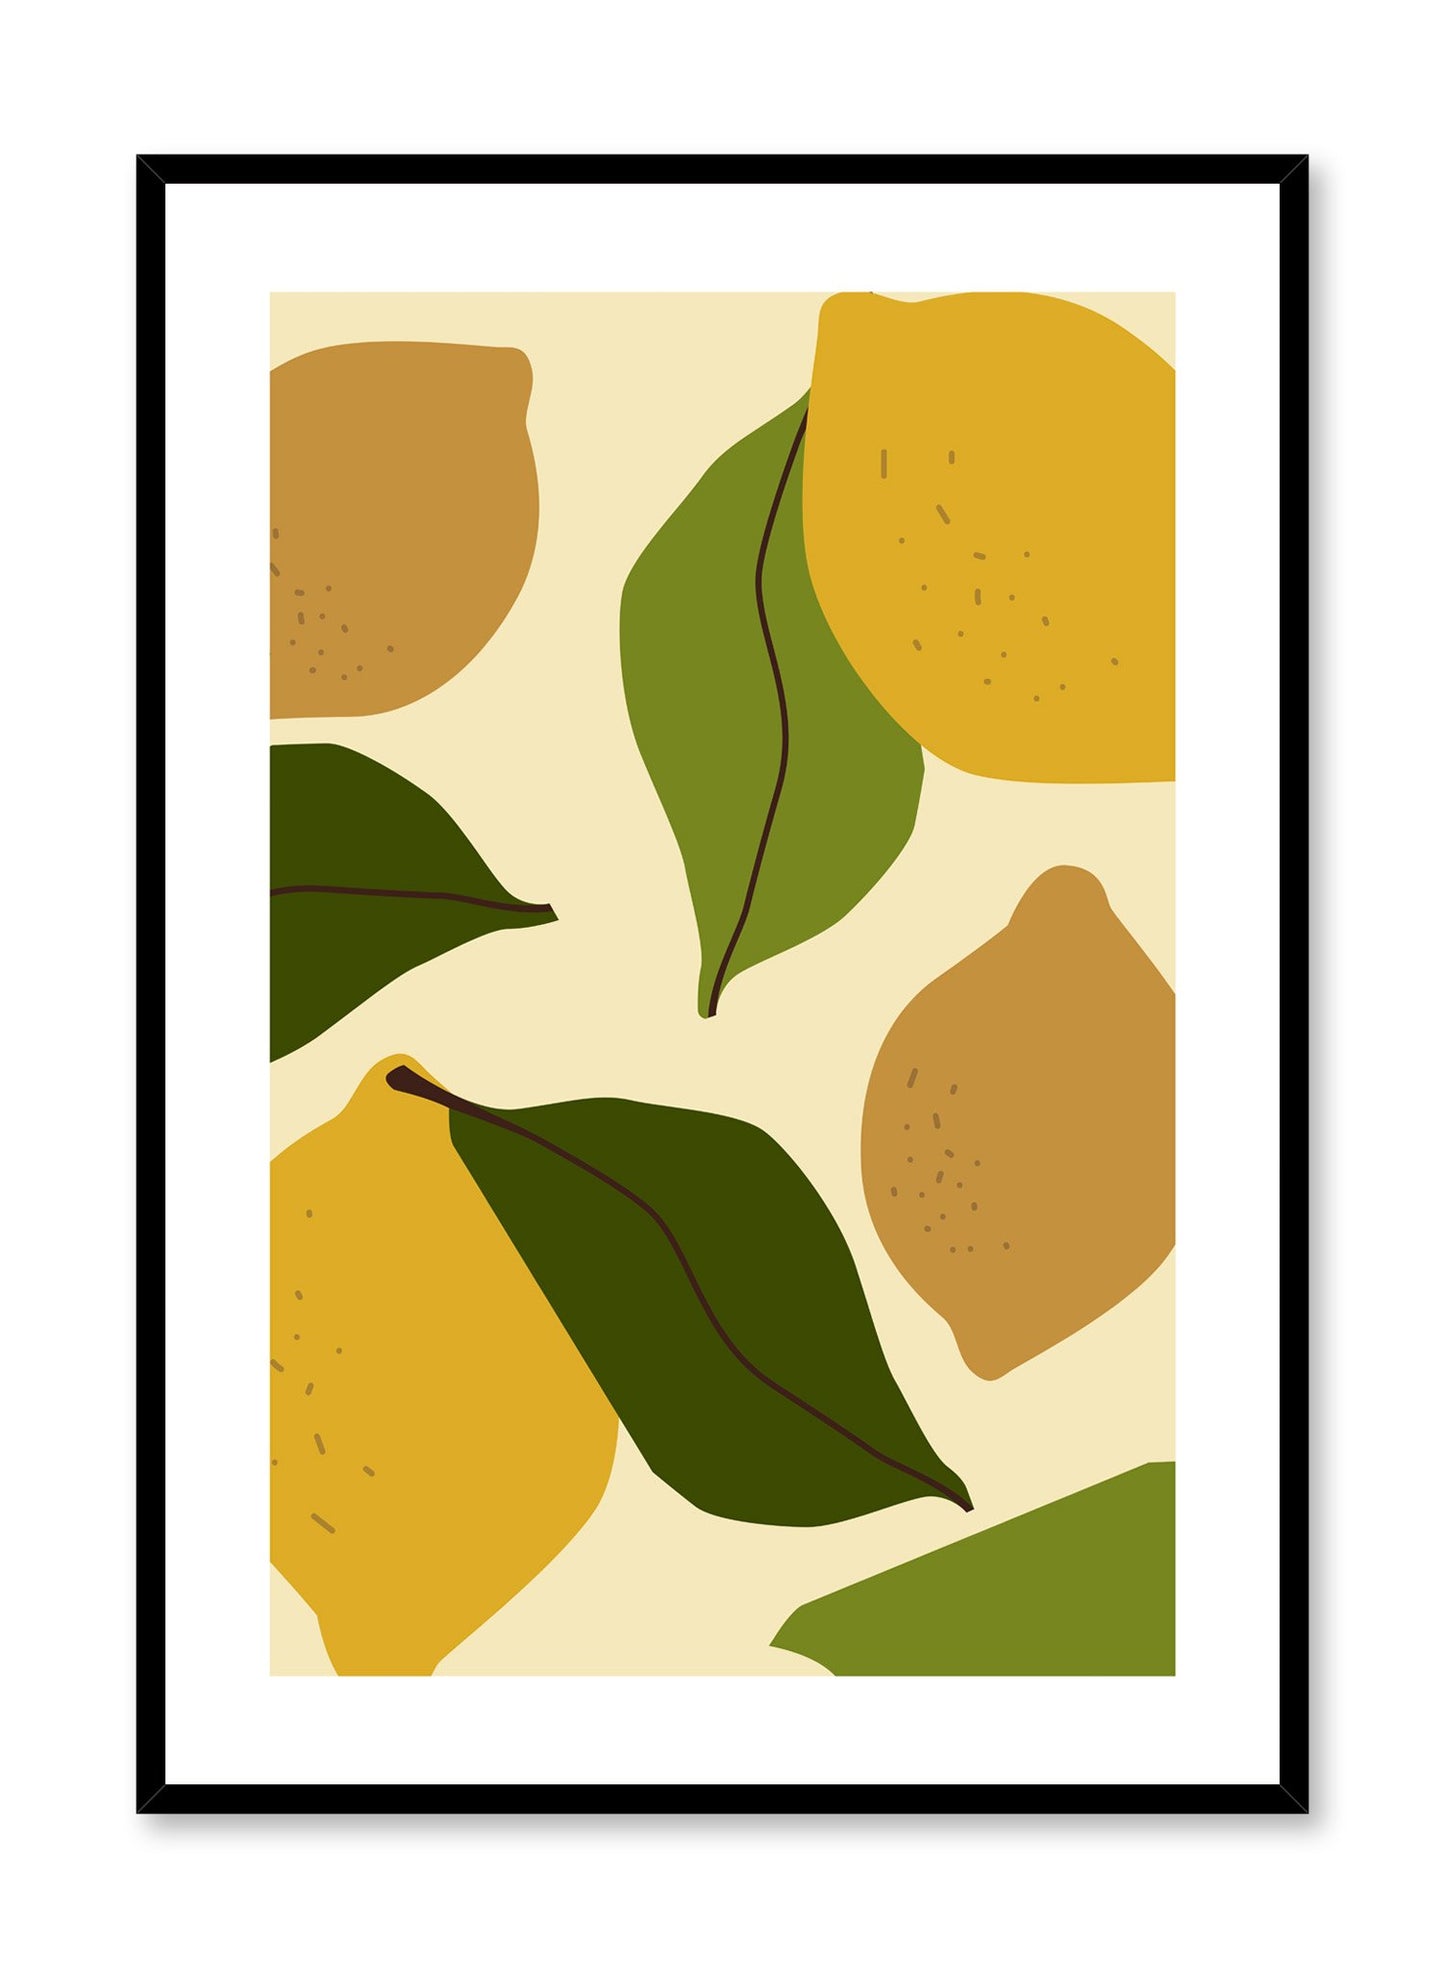 Lemon Party is a citrus illustration poster by Opposite Wall.